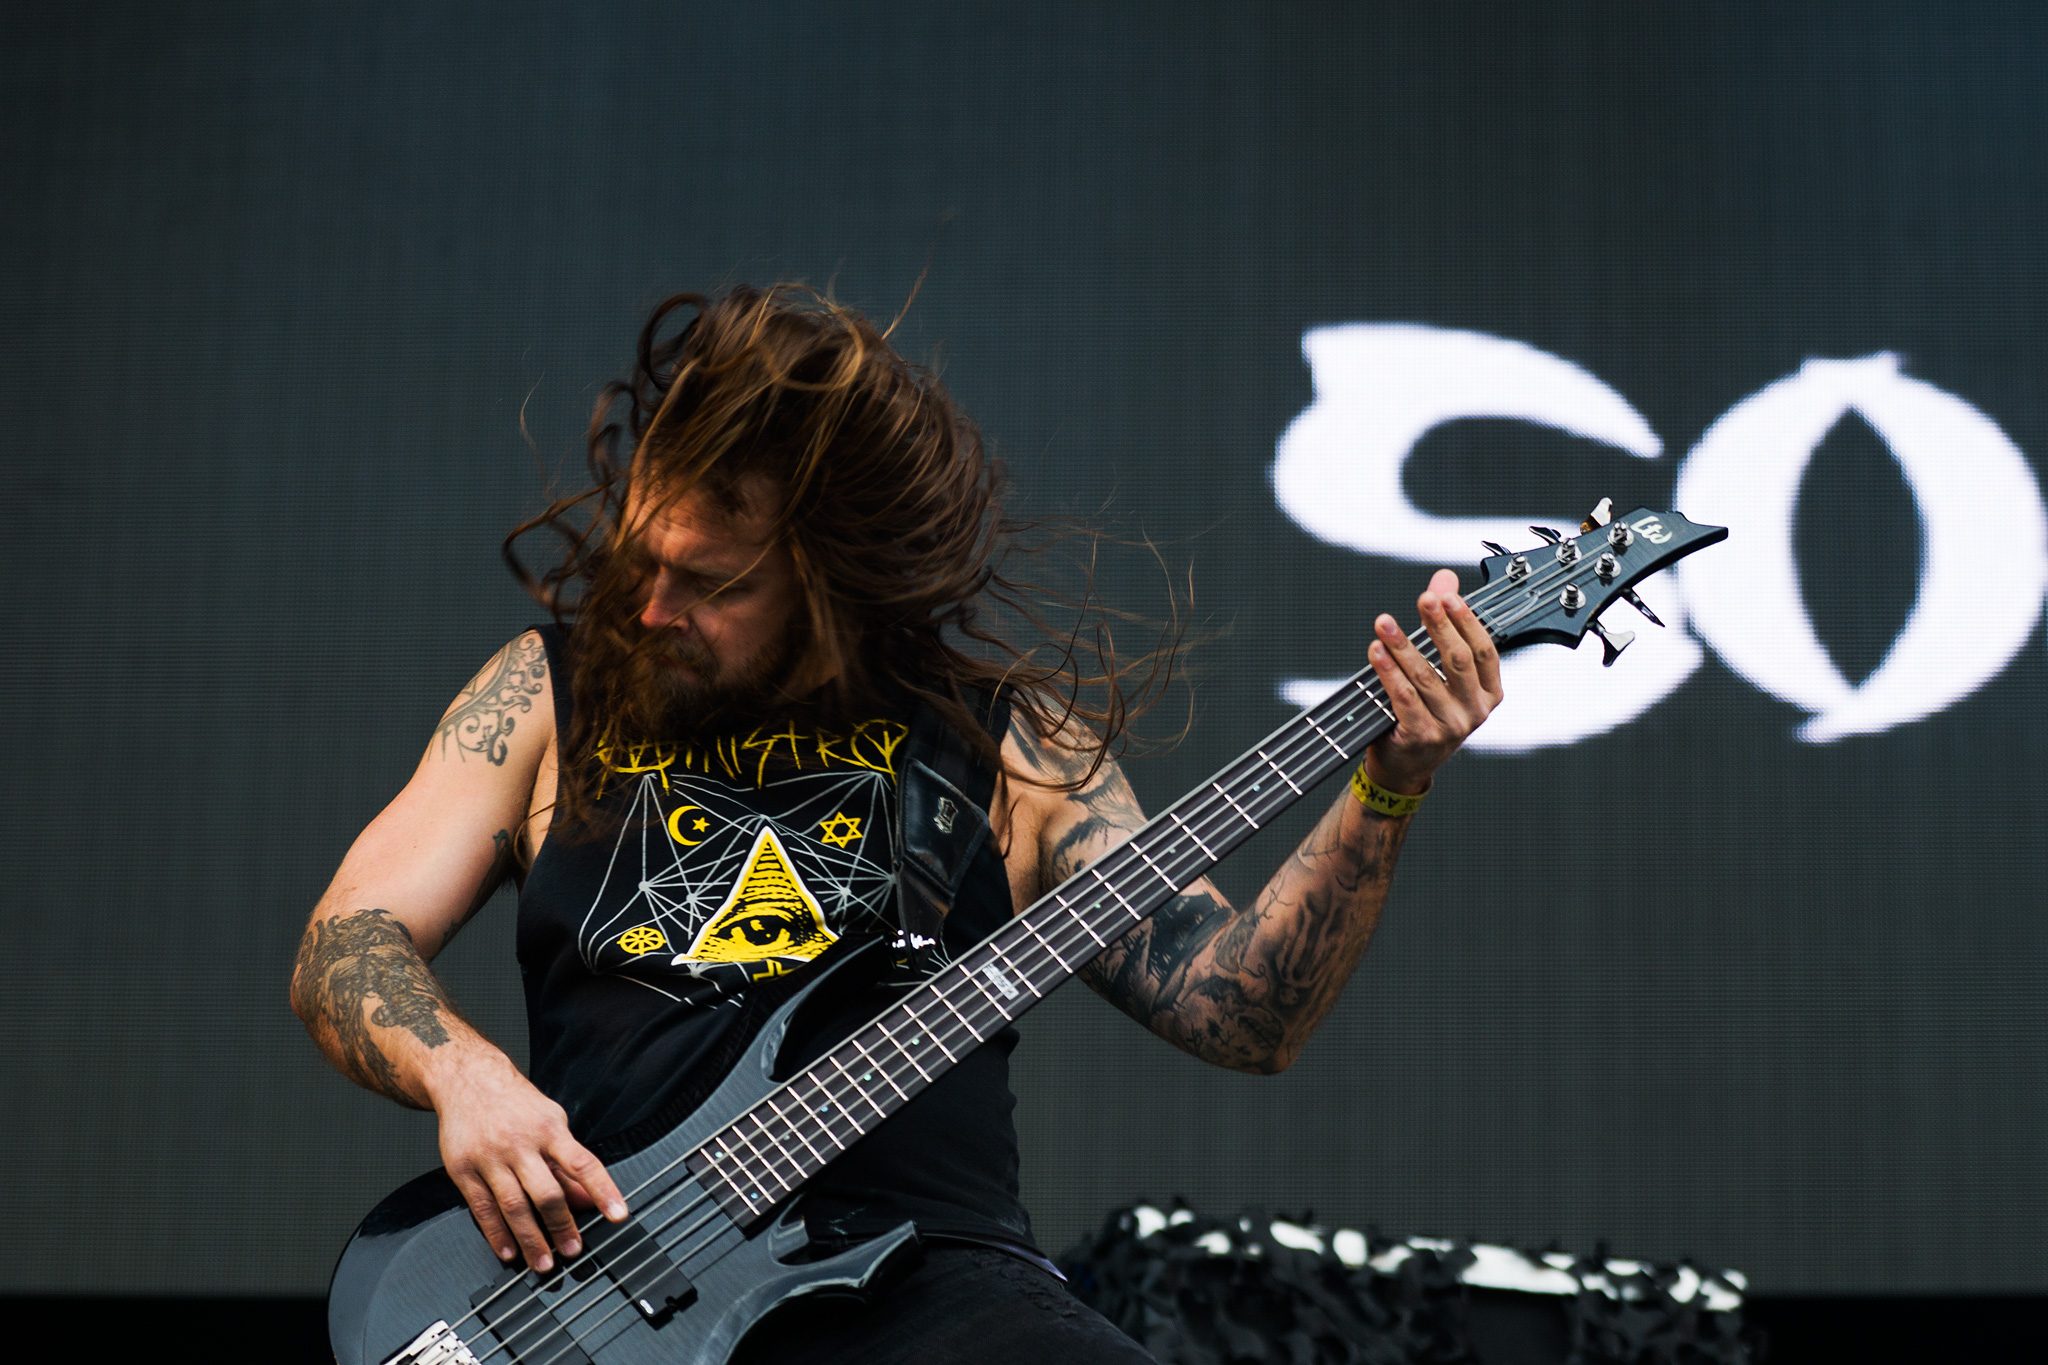 Soulfly